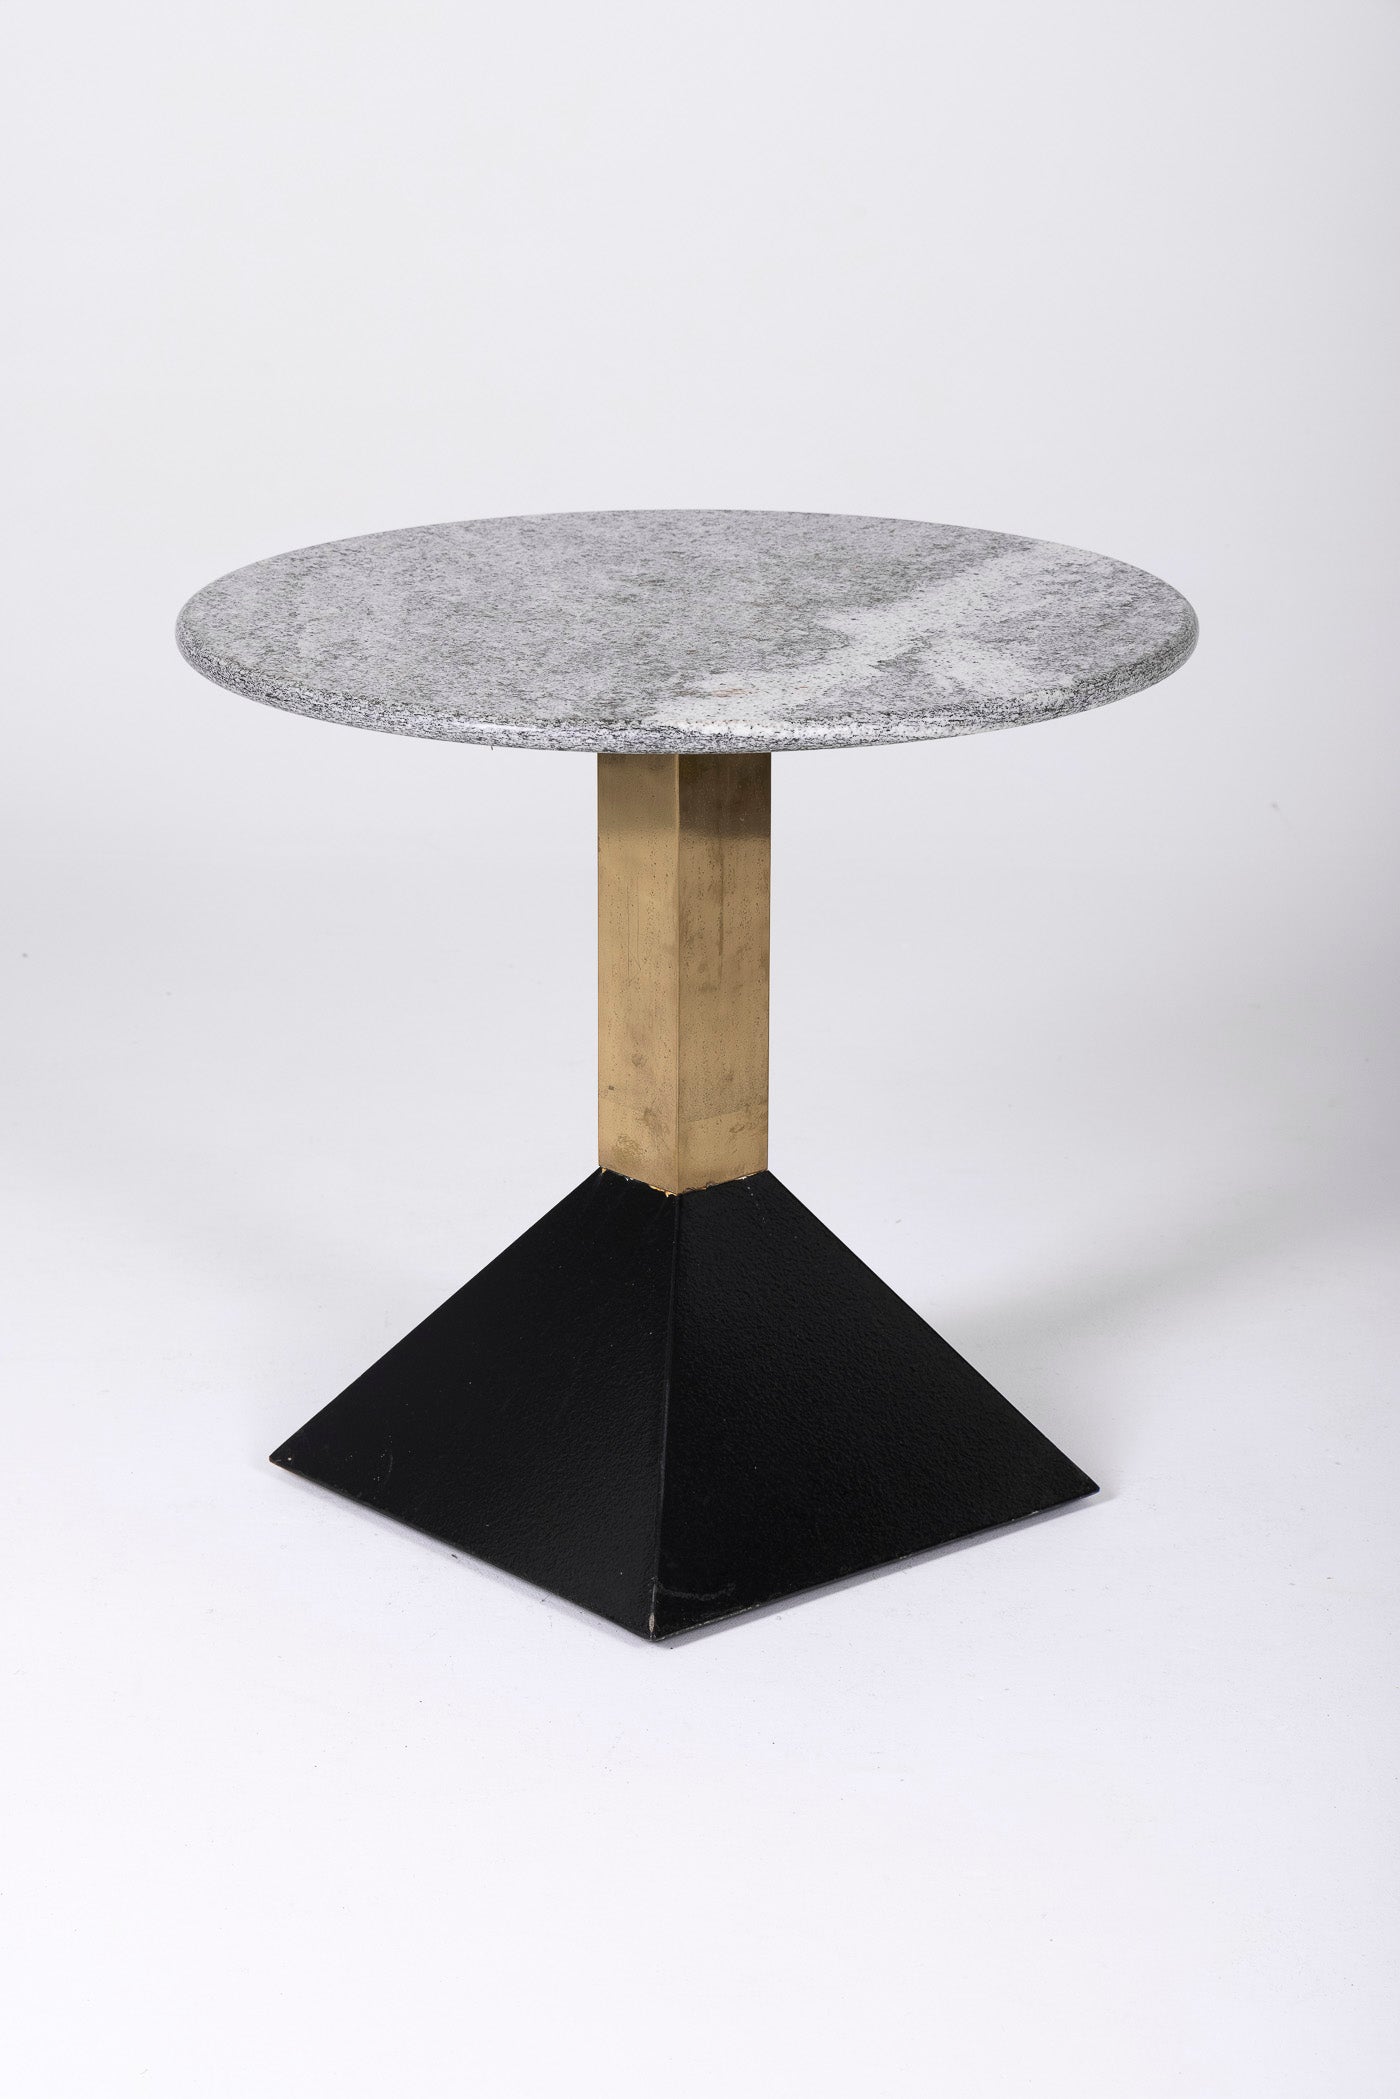 Memphis side table or pedestal table